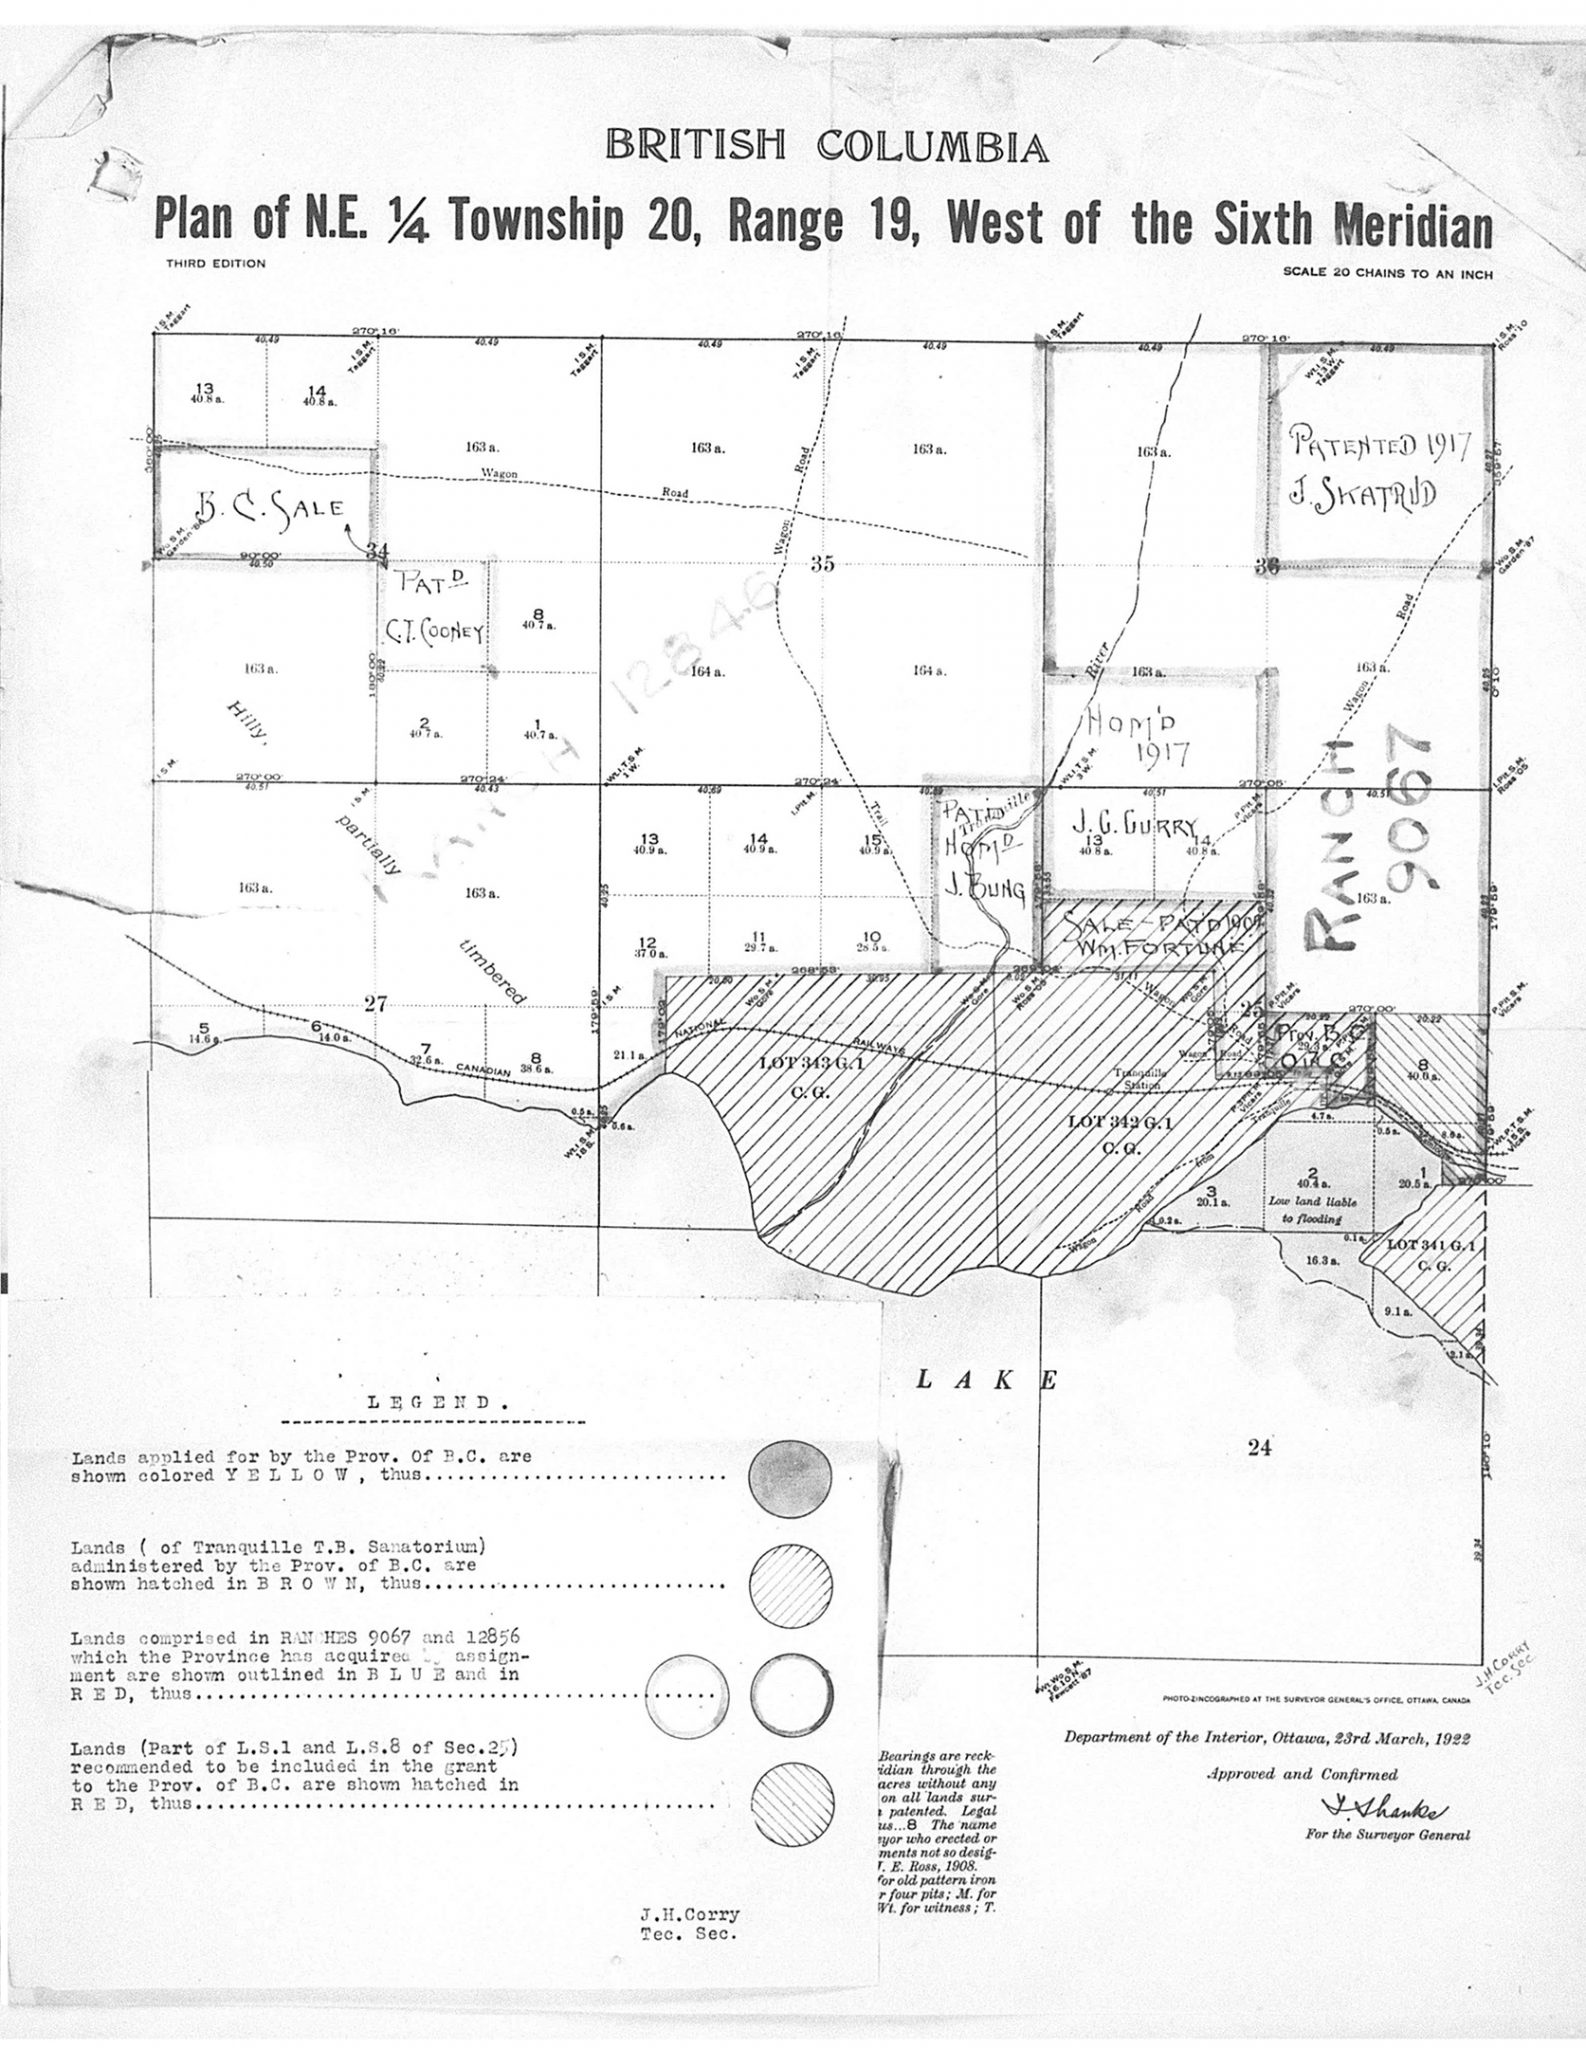 1922 Dominion Land Grant Plan for Tranquille